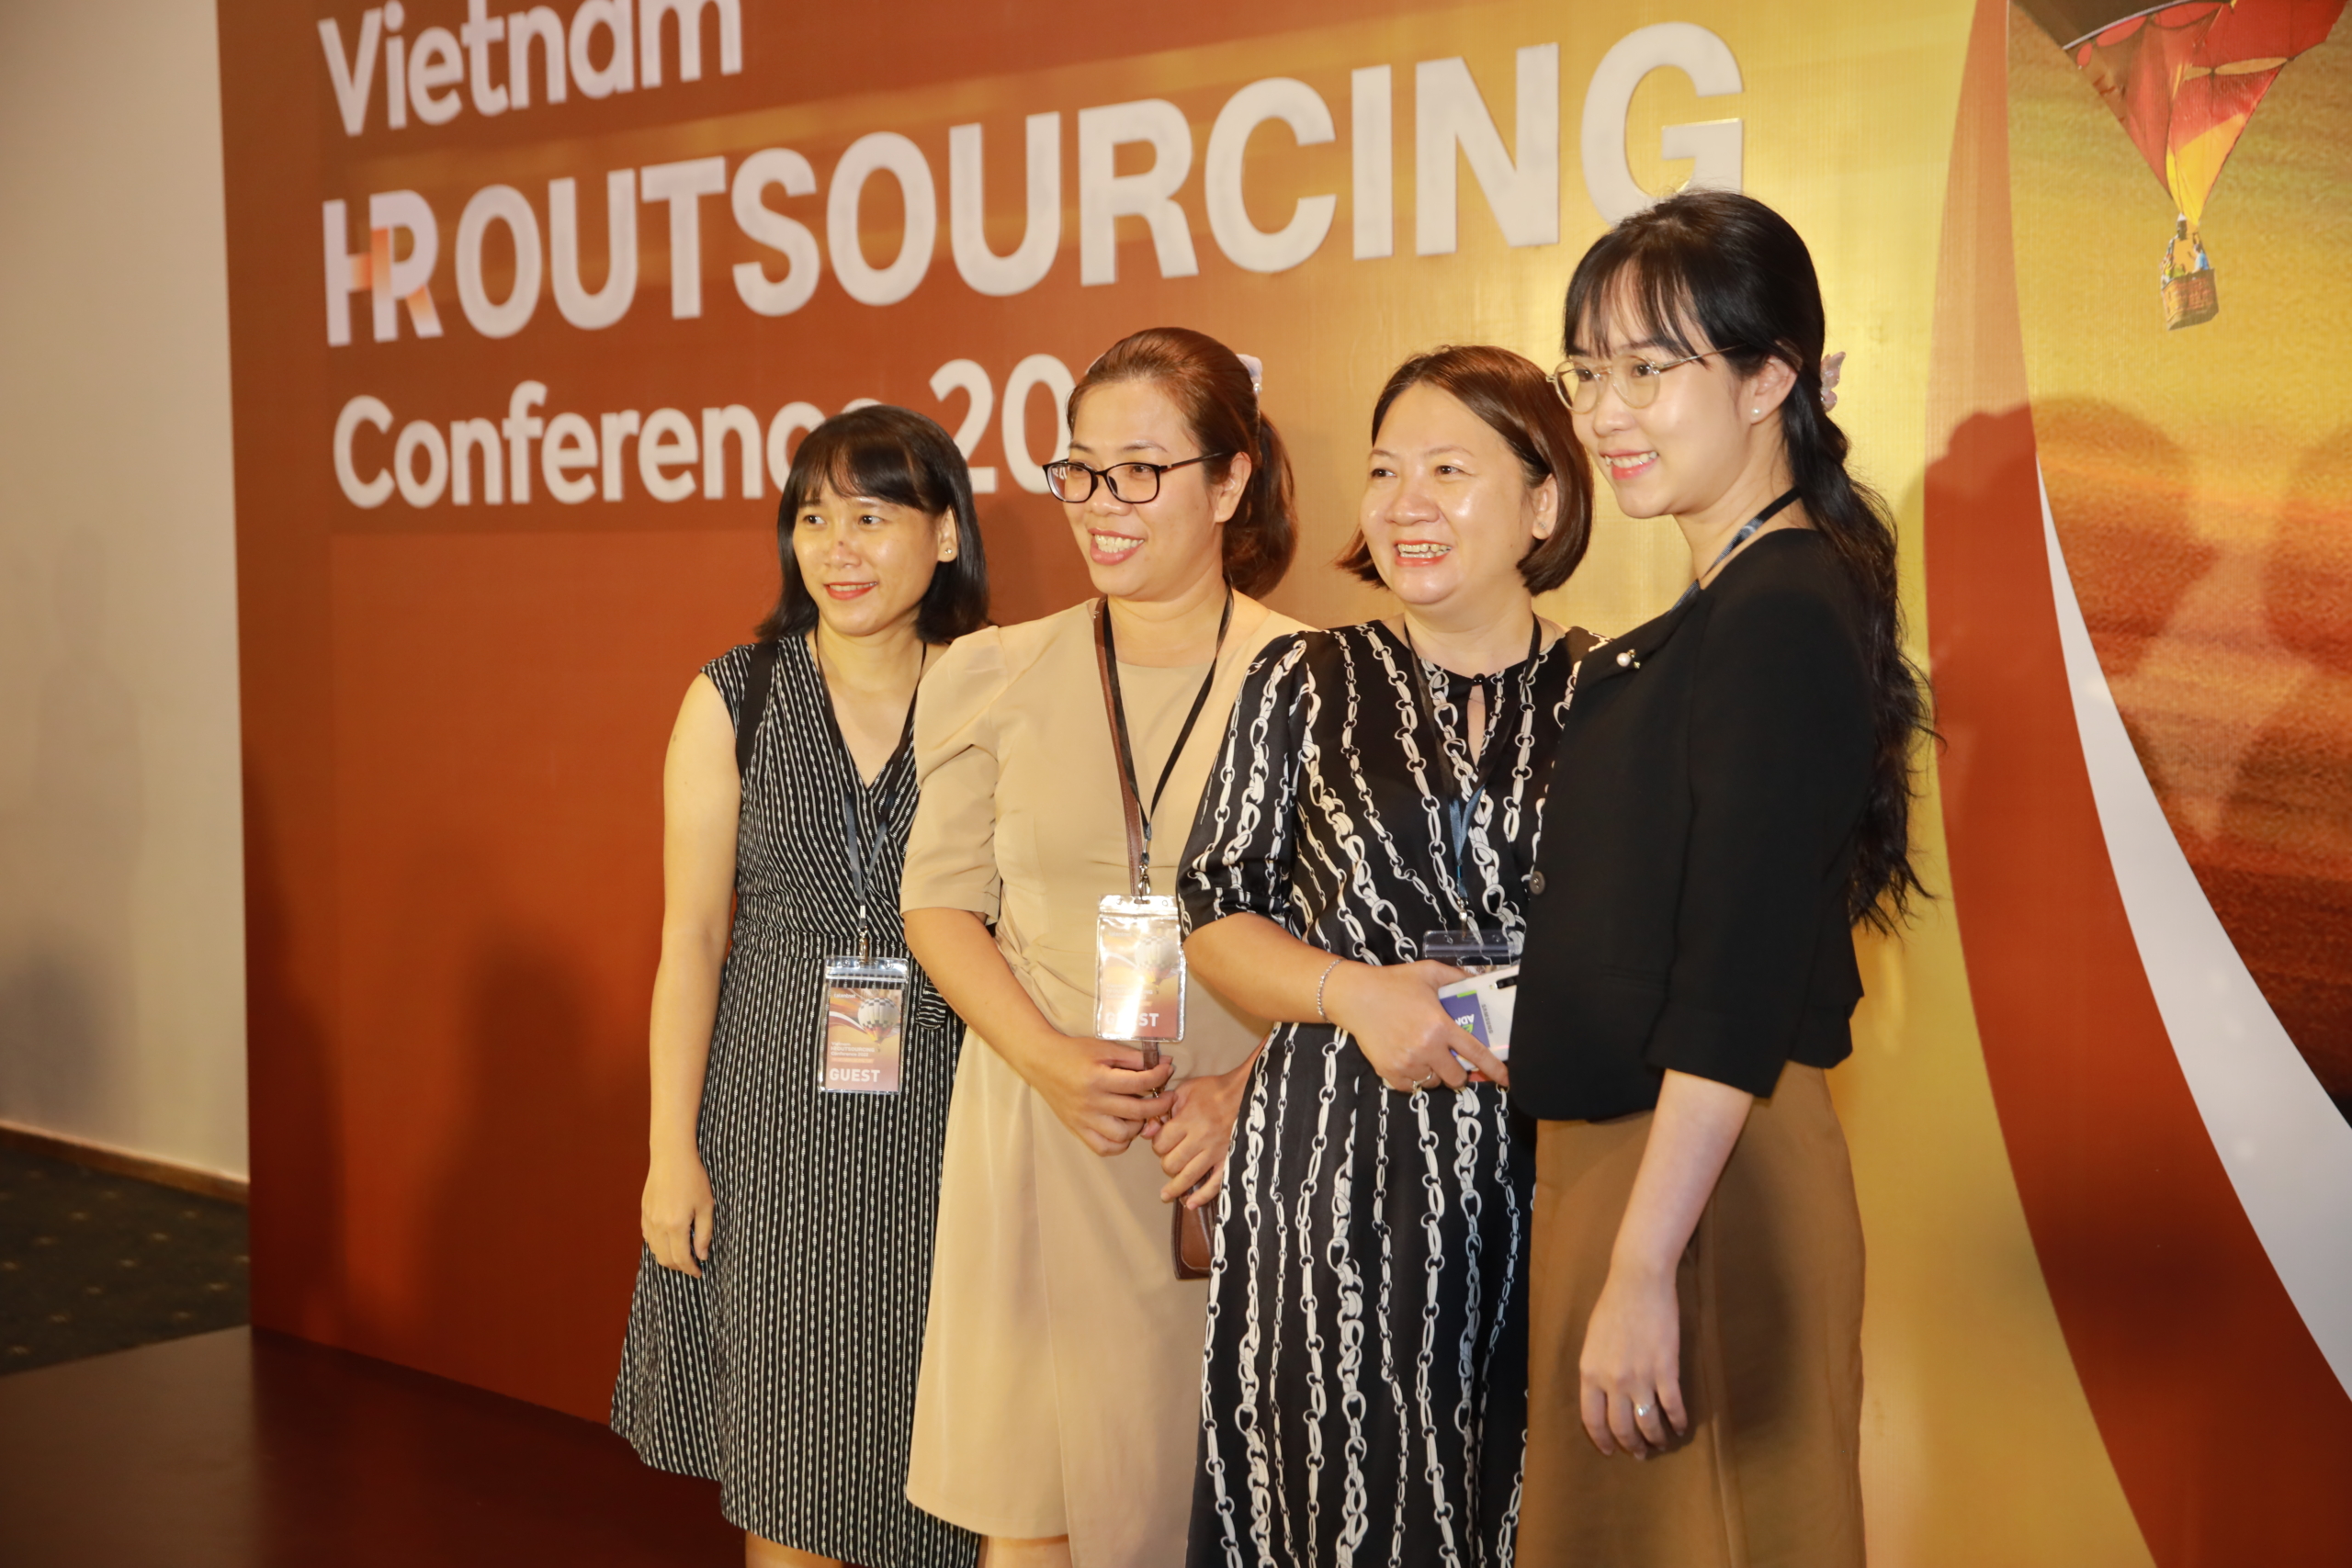 Vietnam HR Outsourcing Conference 2022